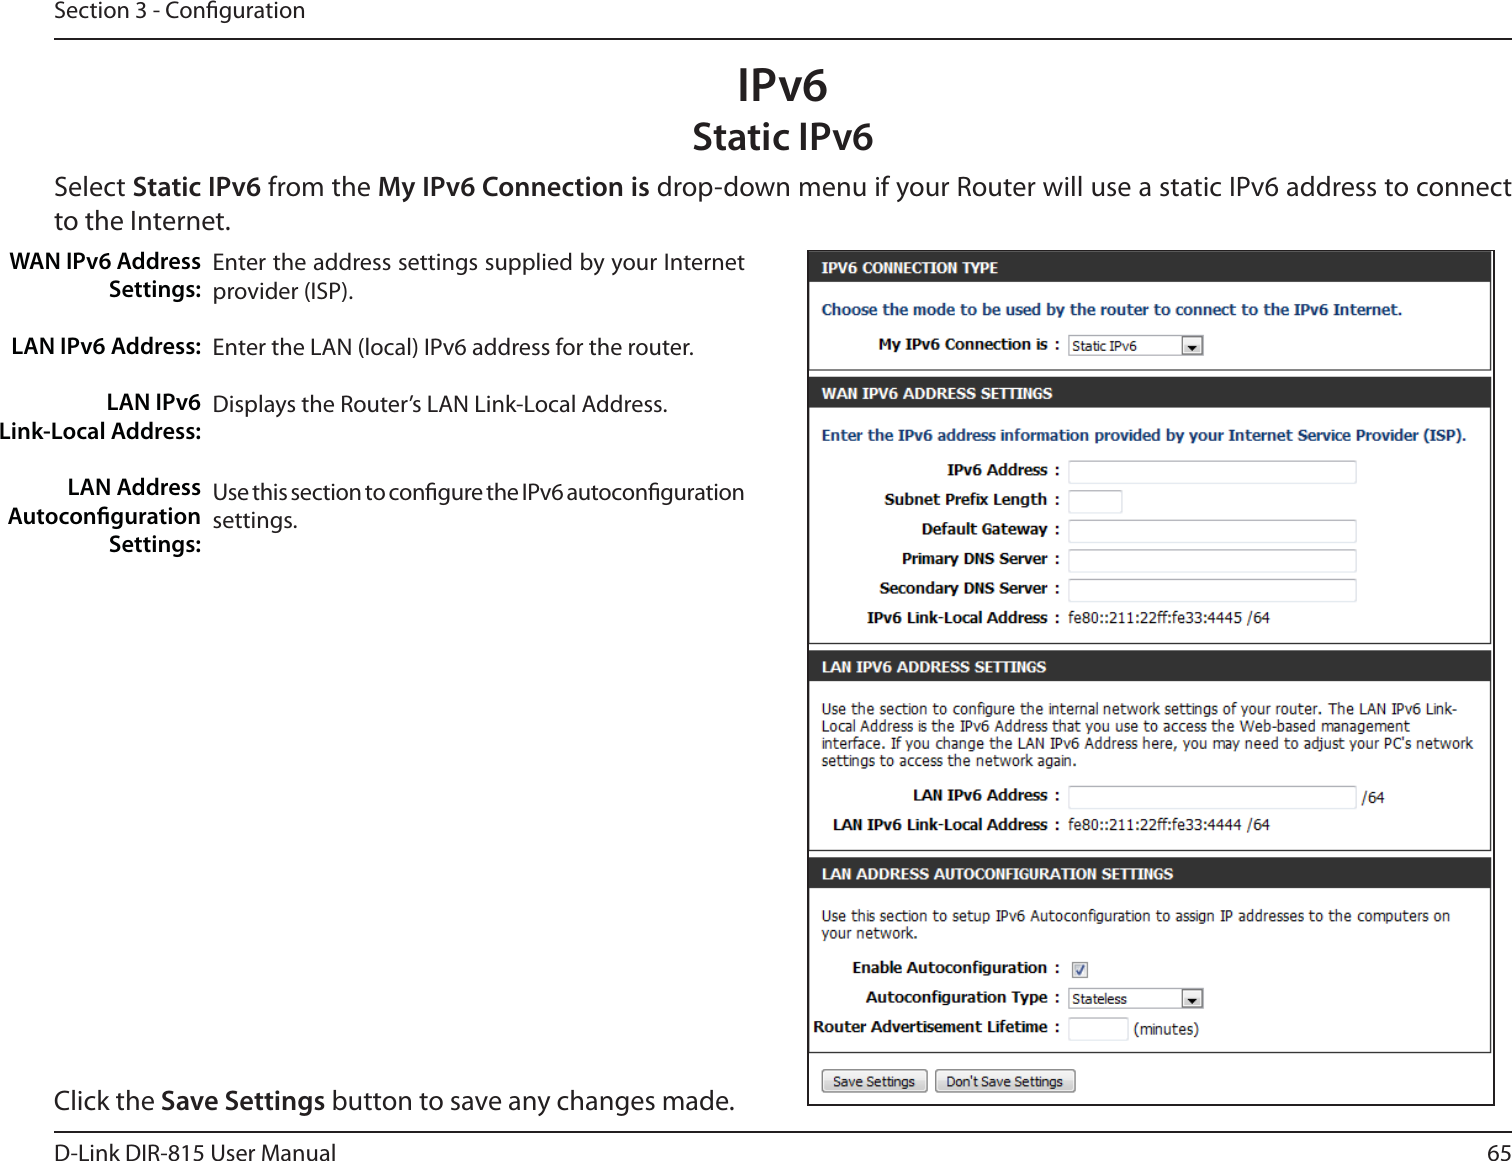 65D-Link DIR-815 User ManualSection 3 - CongurationIPv6Static IPv6Select Static IPv6 from the My IPv6 Connection is drop-down menu if your Router will use a static IPv6 address to connect to the Internet.Enter the address settings supplied by your Internet provider (ISP). Enter the LAN (local) IPv6 address for the router. Displays the Router’s LAN Link-Local Address.Use this section to congure the IPv6 autoconguration settings.WAN IPv6 Address Settings:LAN IPv6 Address:LAN IPv6  Link-Local Address:LAN Address Autoconguration Settings:Click the Save Settings button to save any changes made.